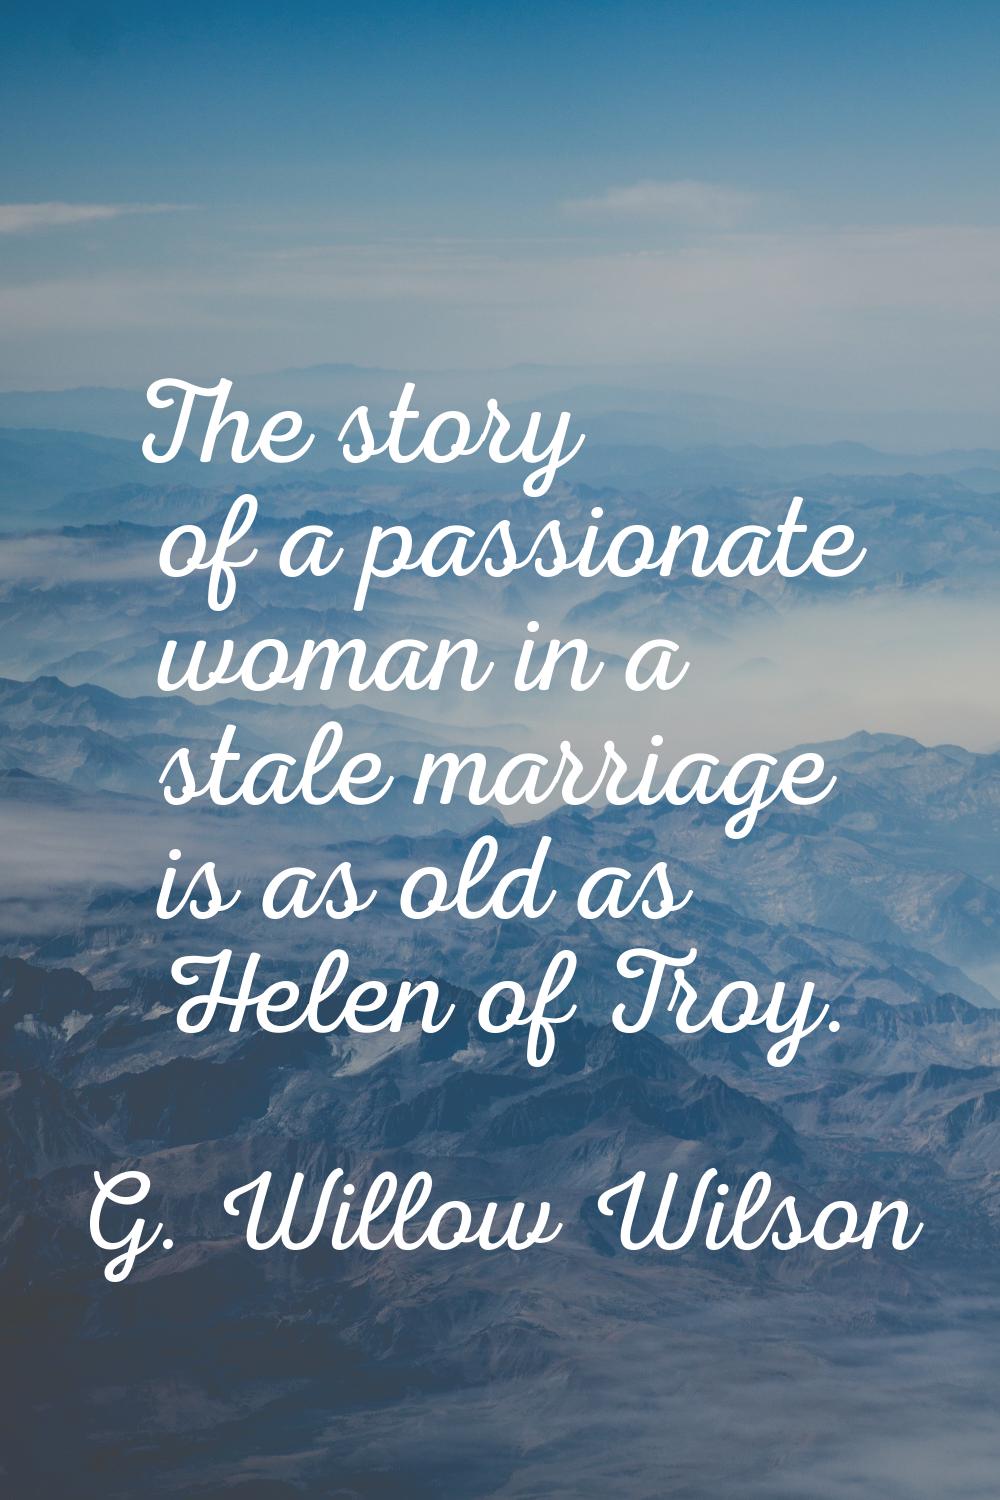 The story of a passionate woman in a stale marriage is as old as Helen of Troy.